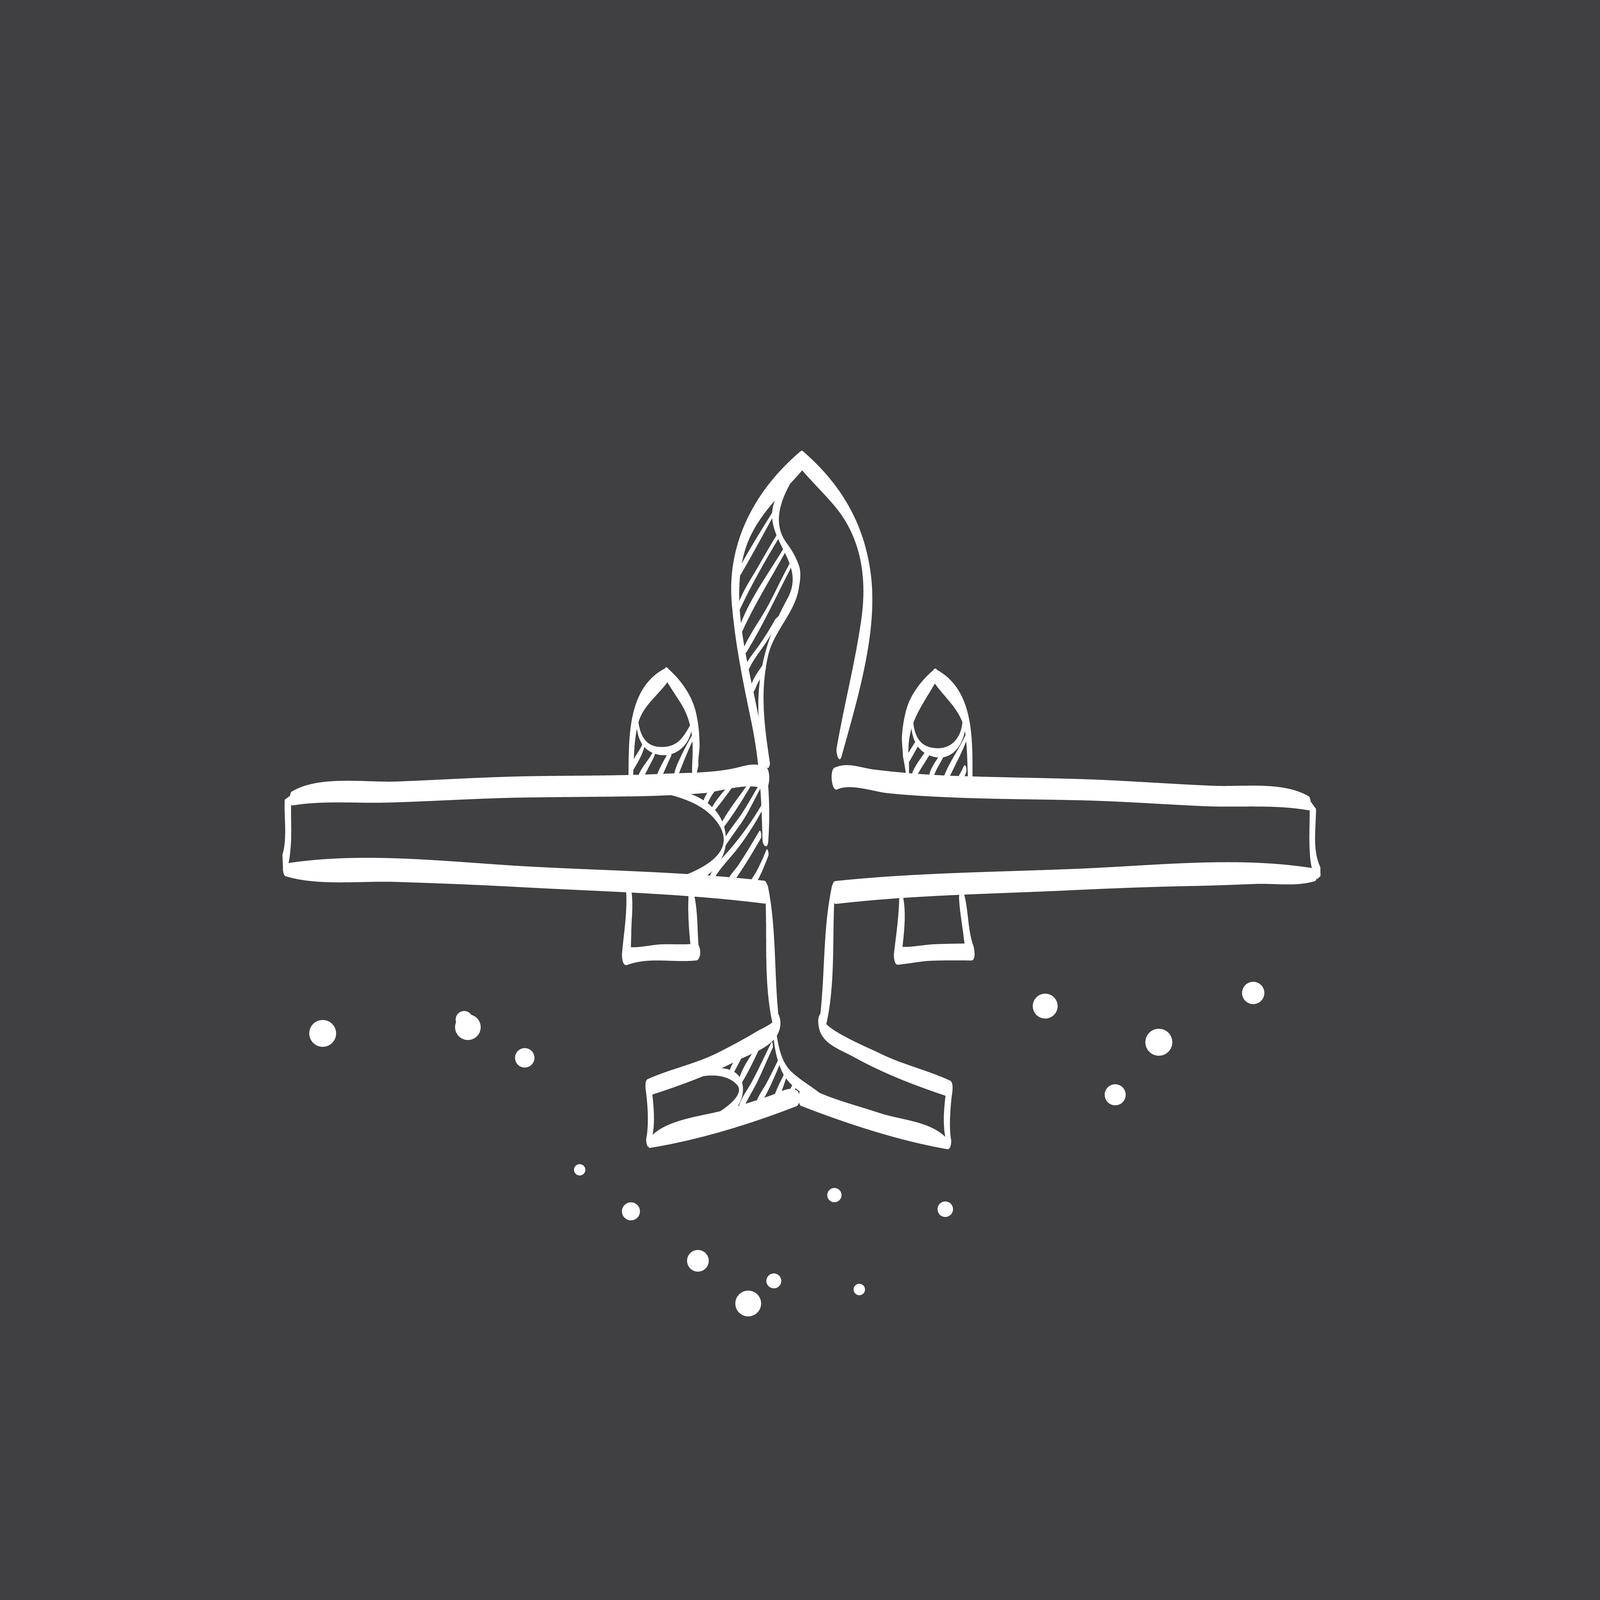 Sketch icon in black - Unmanned aerial vehicle by puruan